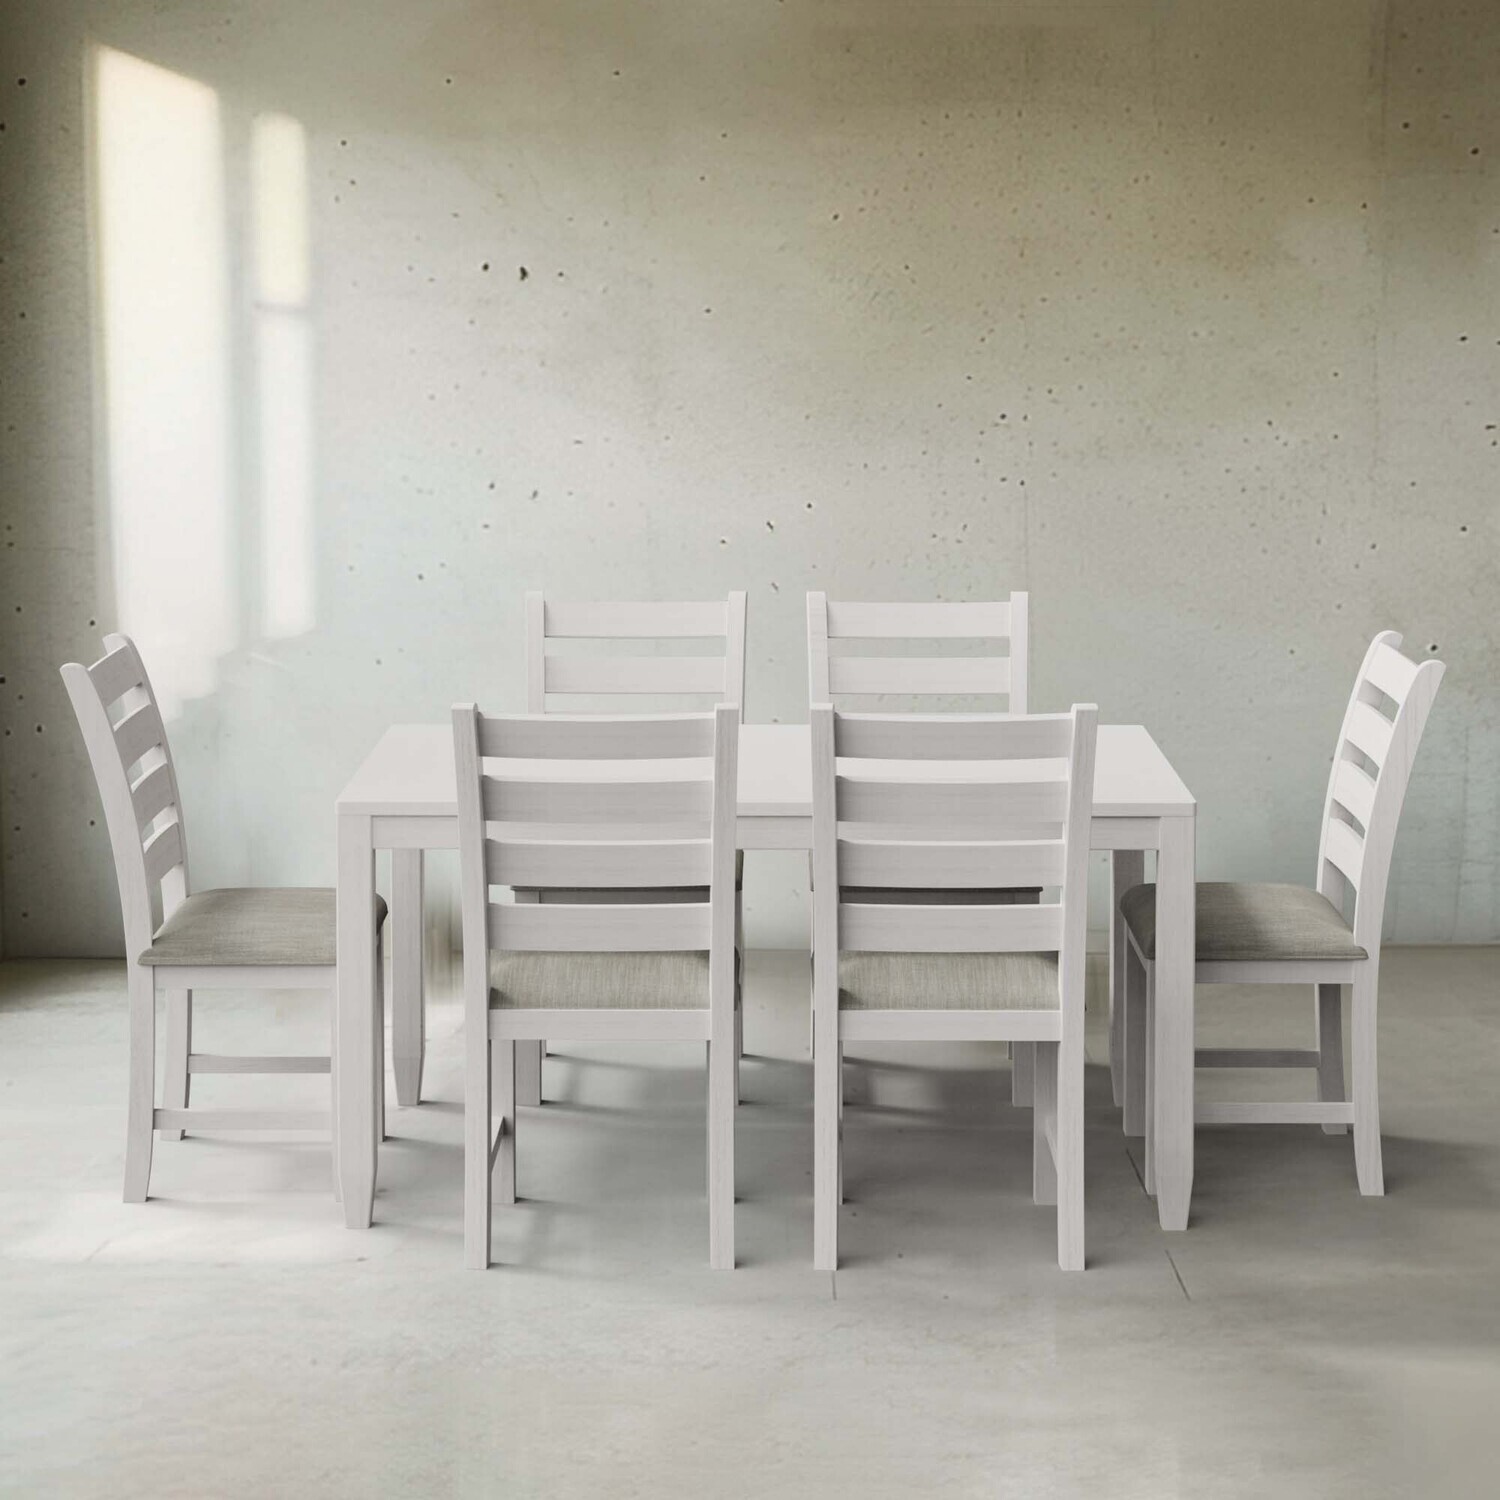 Frampton Dining Table Set - 4, 6 & 8 Seater/All Sizes